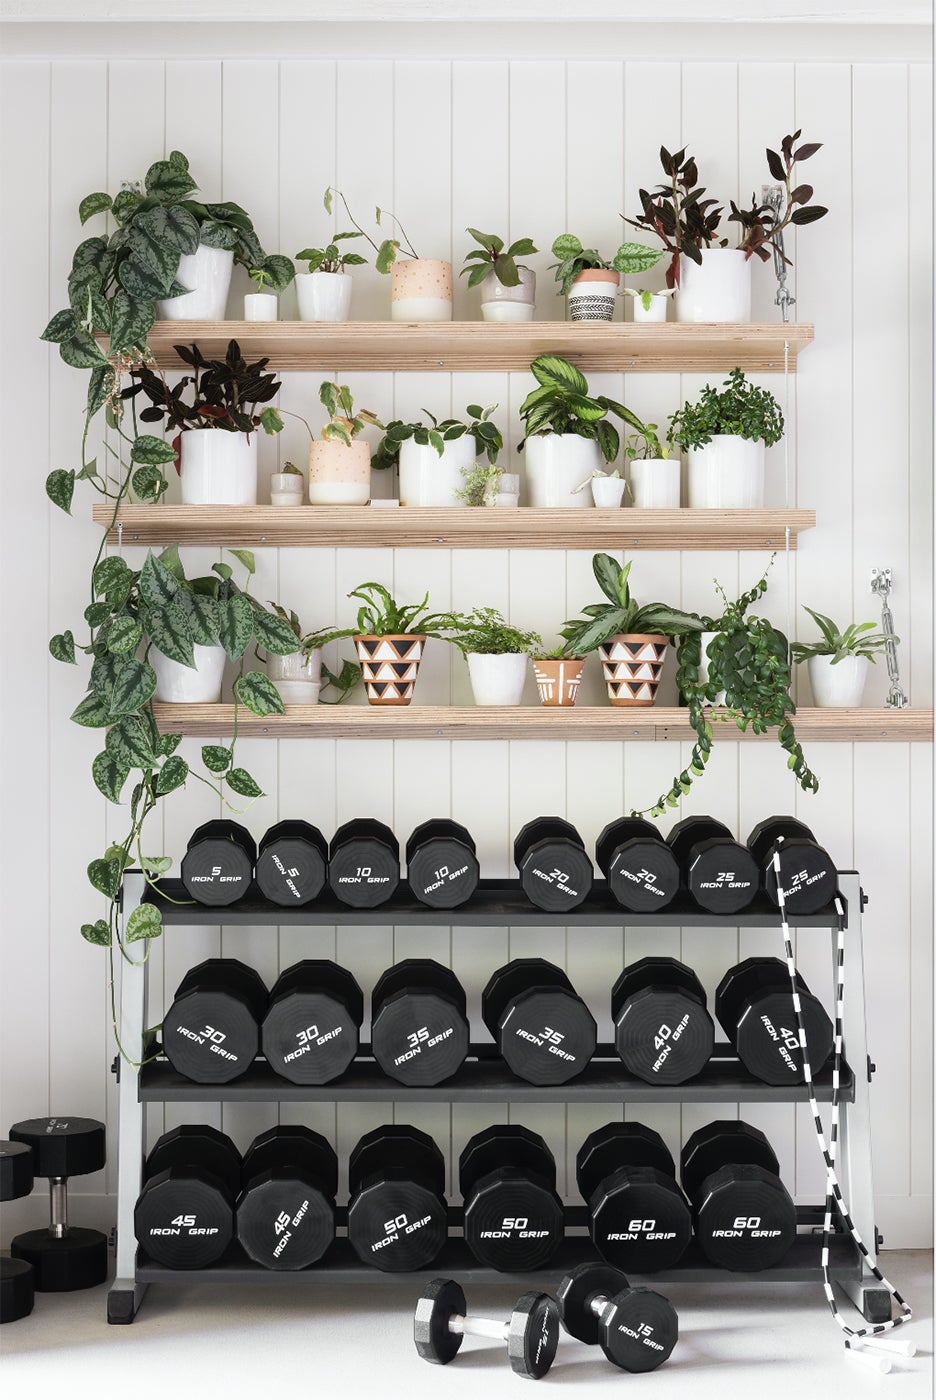 Shelves with weights and plants